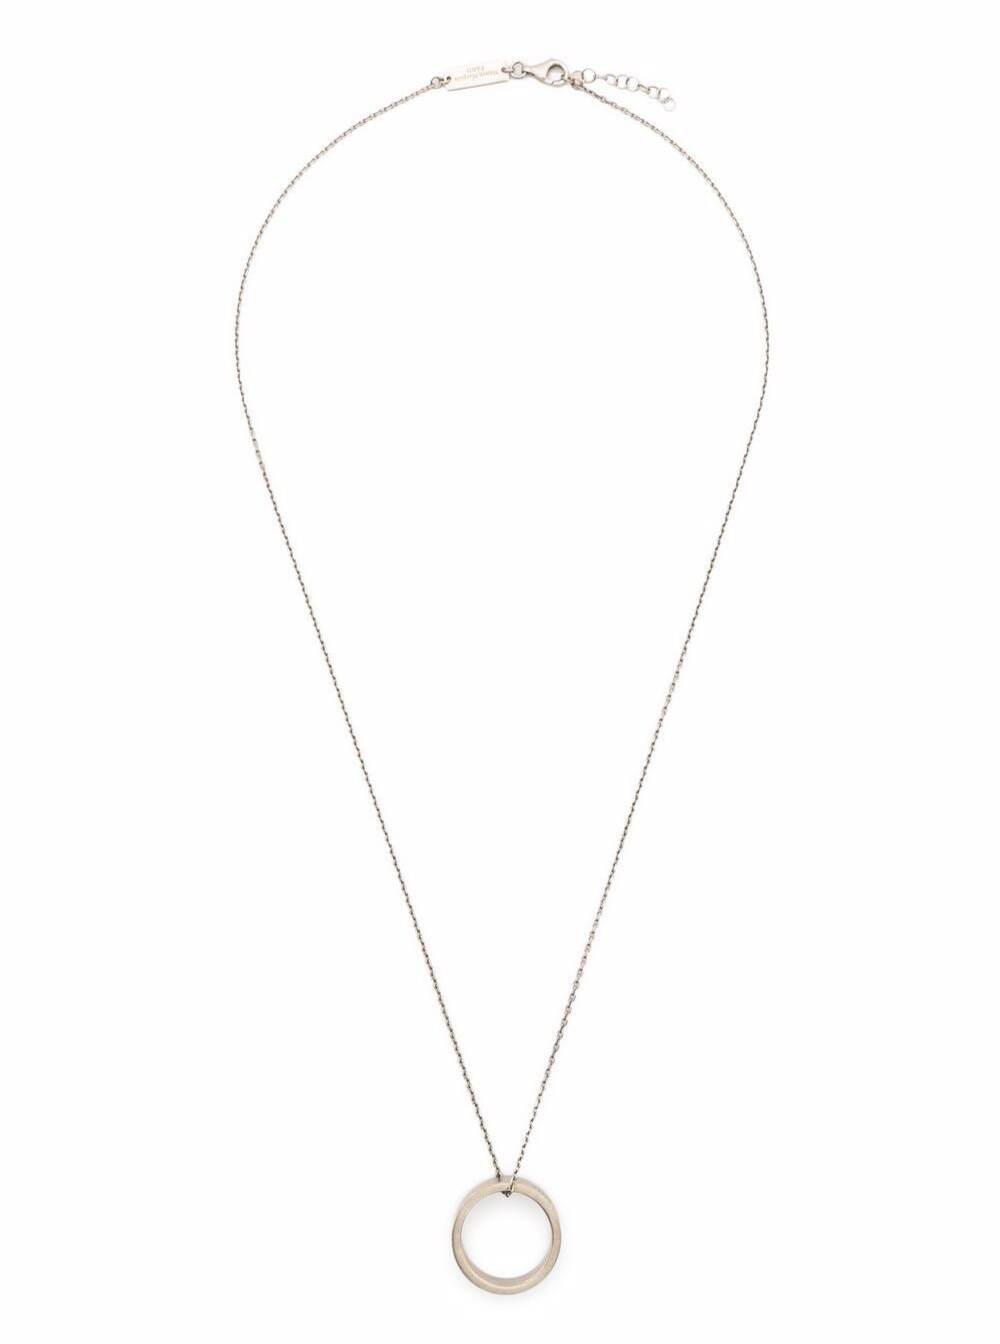 Maison Margiela Womens Silver Necklace With Ring Pendant